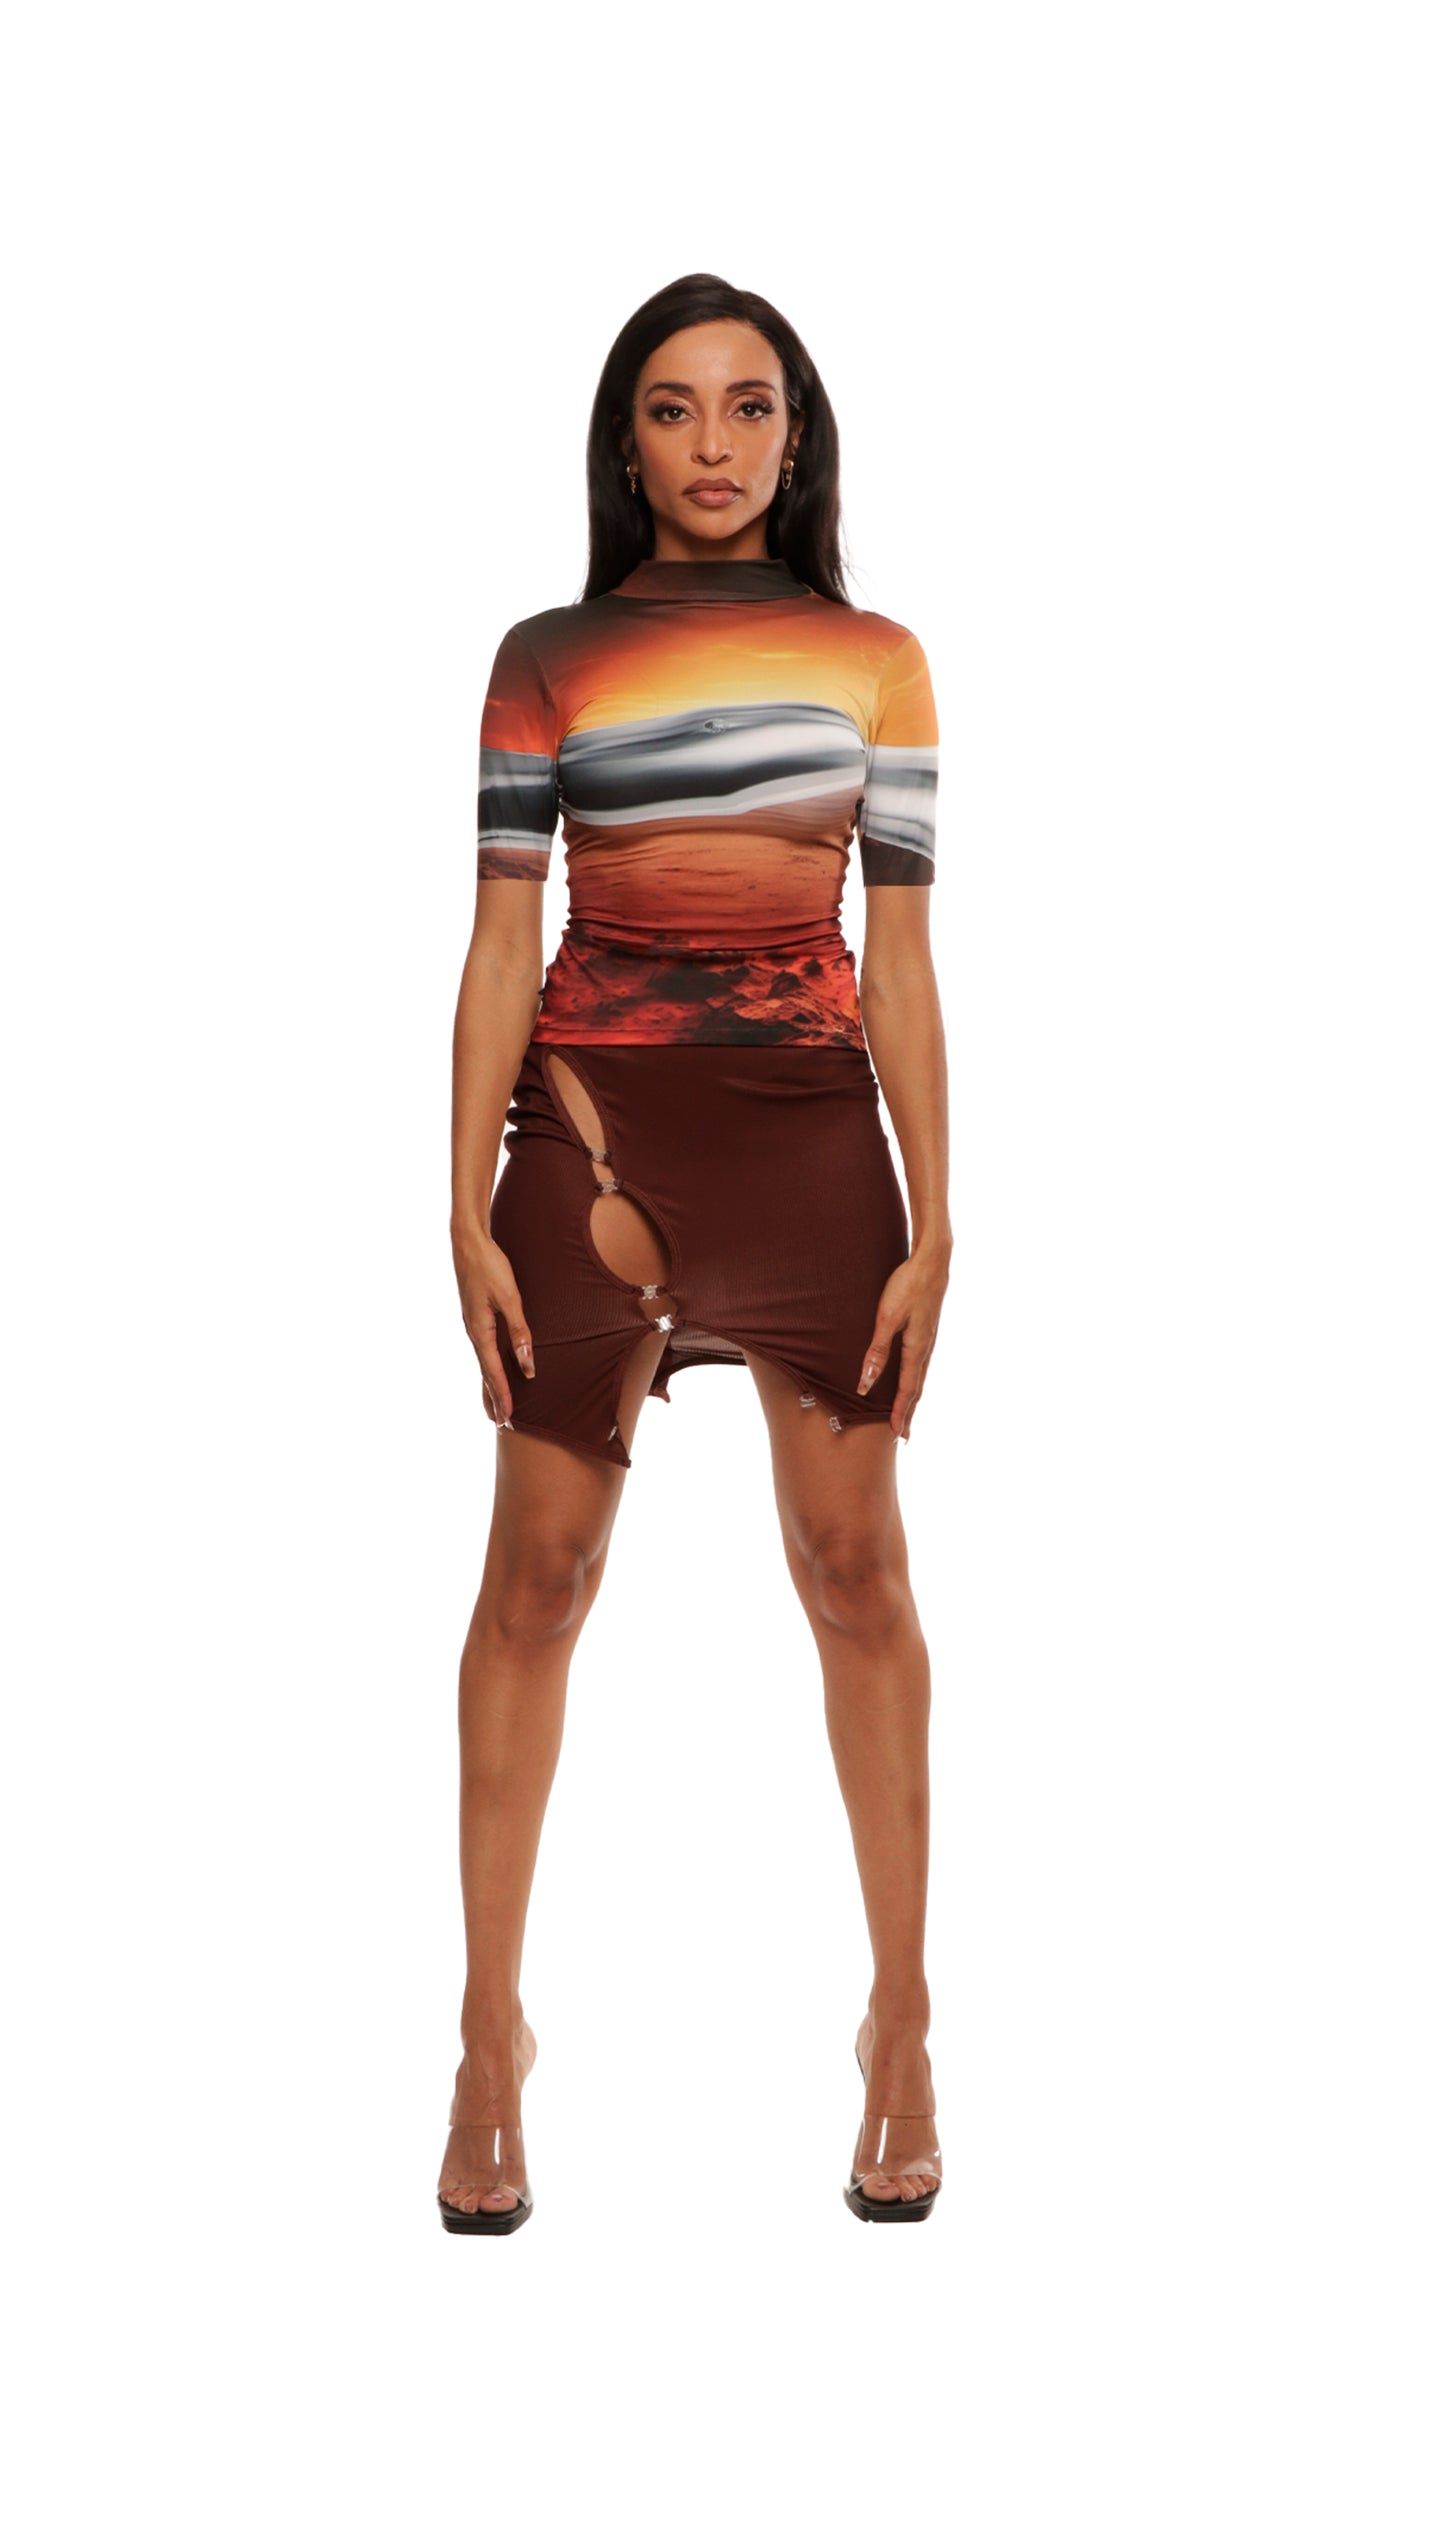 Woman who looks like Beyoncé or Aaliyah wears gradient printed stretch rib knit skirt with adjustable open detail front clasp paired with a custom printed mars sunset short sleeve tee, front view.